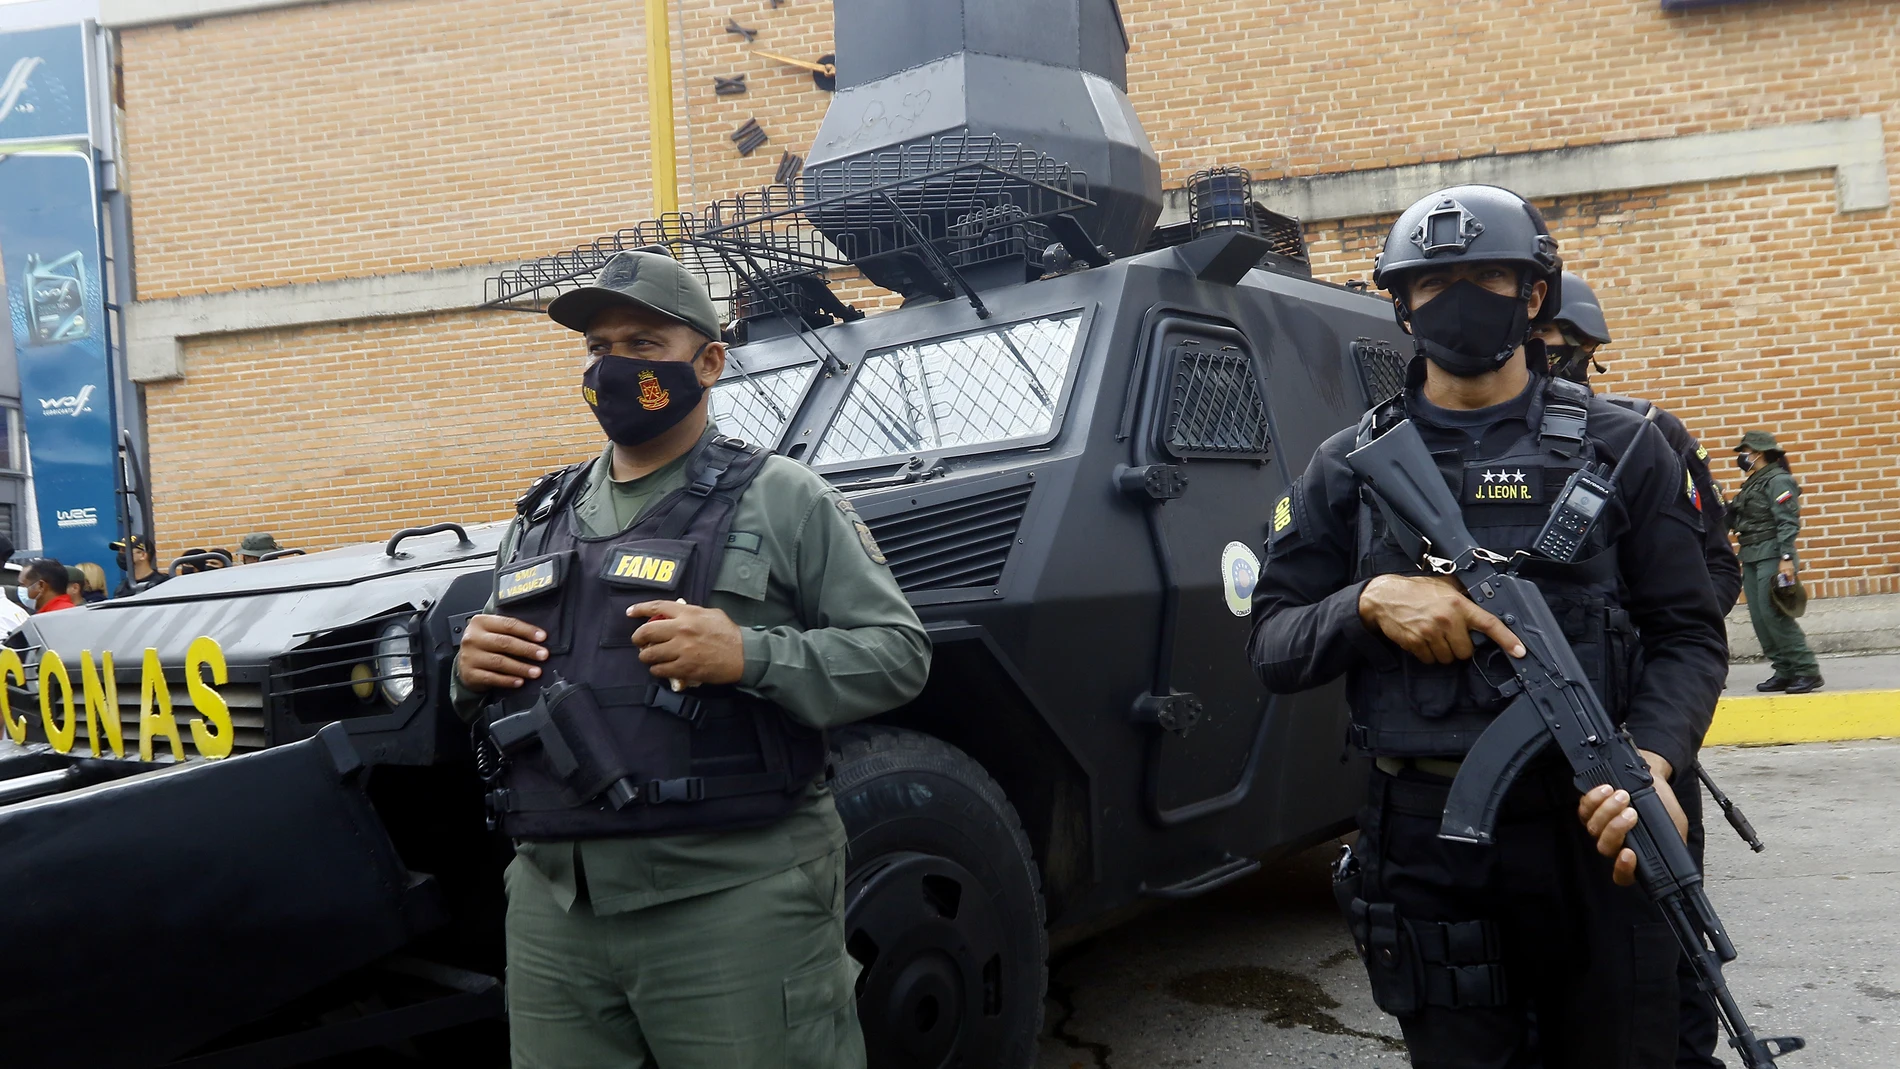 April 7, 2022, Valencia, Carabobo, Venezuela: April 07, 2022. Members of the security corps CONAS (national anti extortion and kidnapping command) during the beginning of the security operation Easter Week 2022, which took place in the north Bolivar avenue in the city of Valencia, Carabobo state. Photo: Juan Carlos Hernandez (Foto de ARCHIVO) 07/04/2022